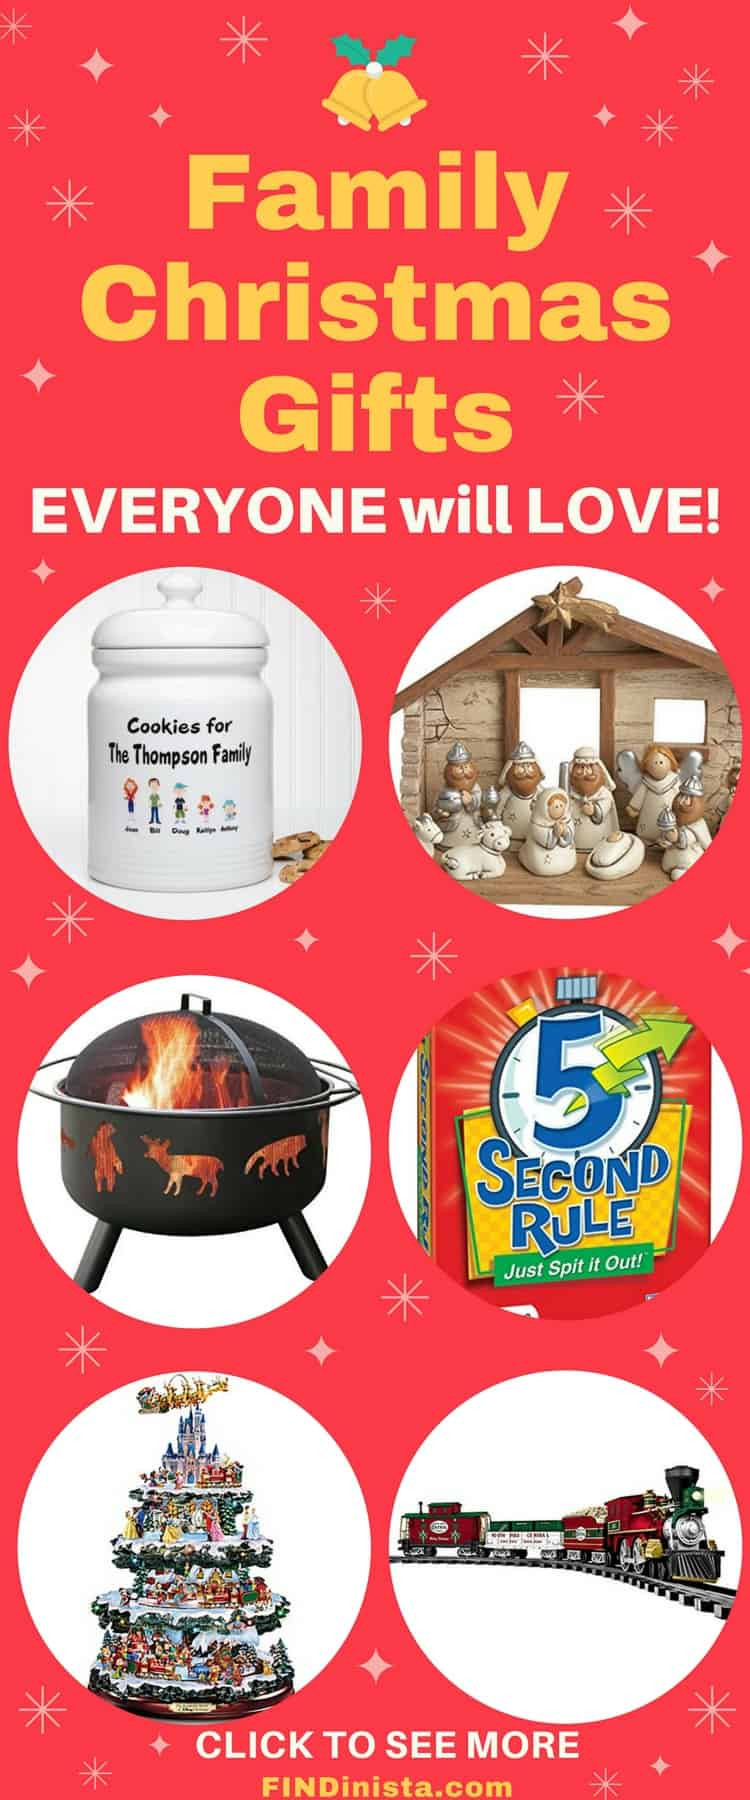 Family Christmas Gift Ideas
 Best Family Gift Ideas for Christmas Fun Gifts the Whole